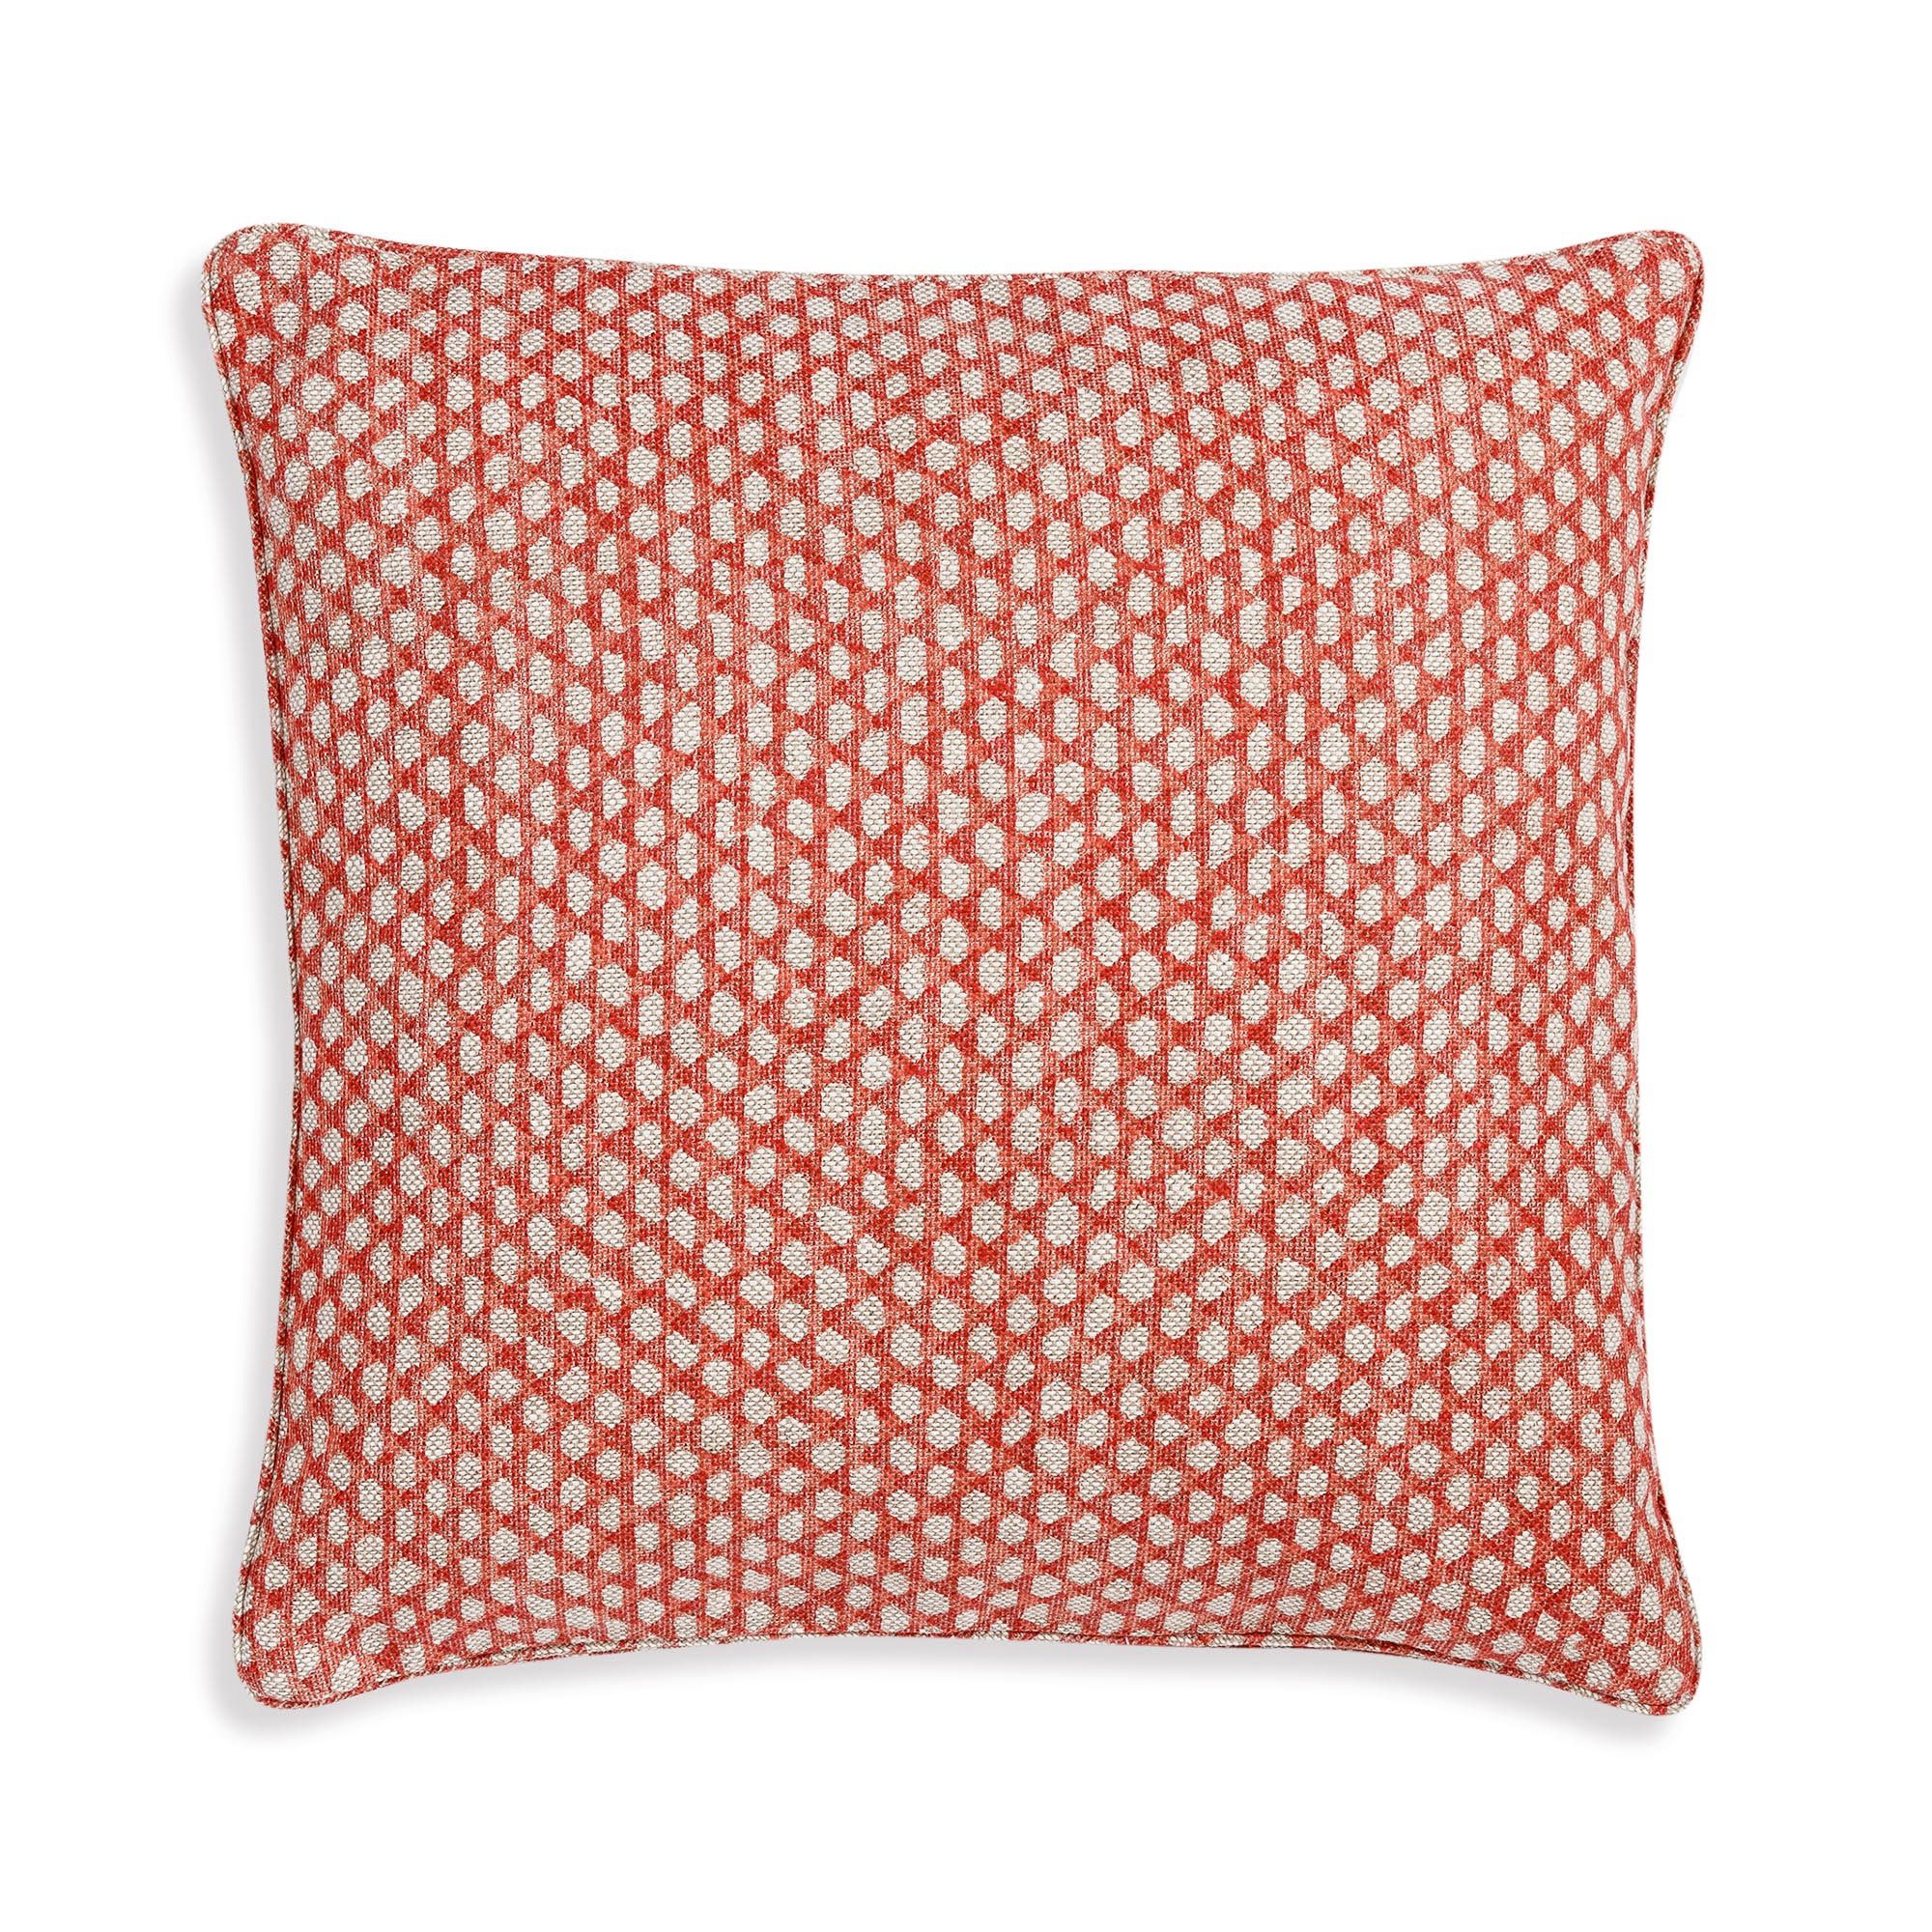 Large Square Cushion in Red Wicker